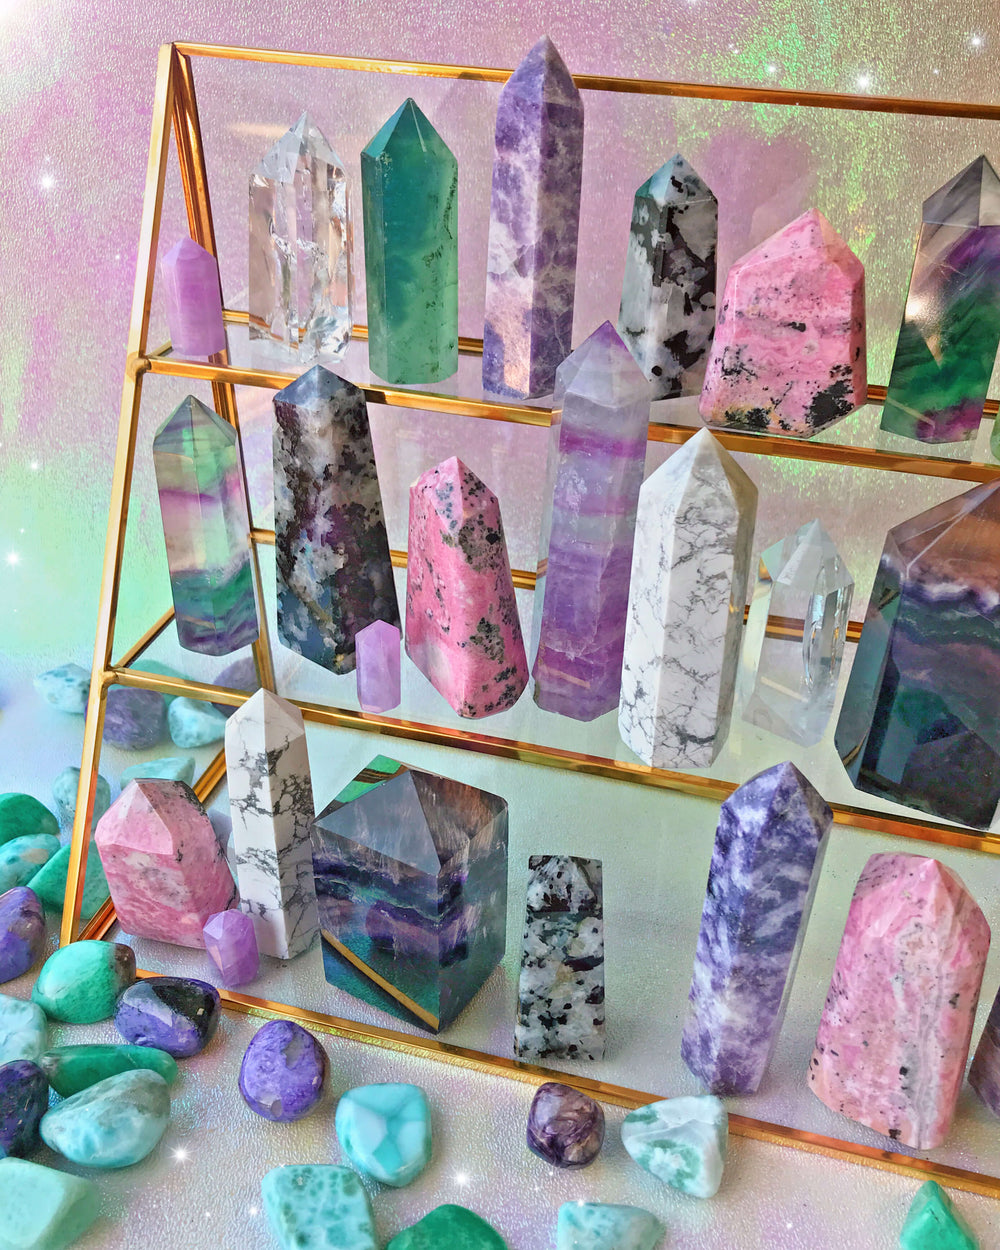 12 Healing Crystals and Their Meanings + Uses